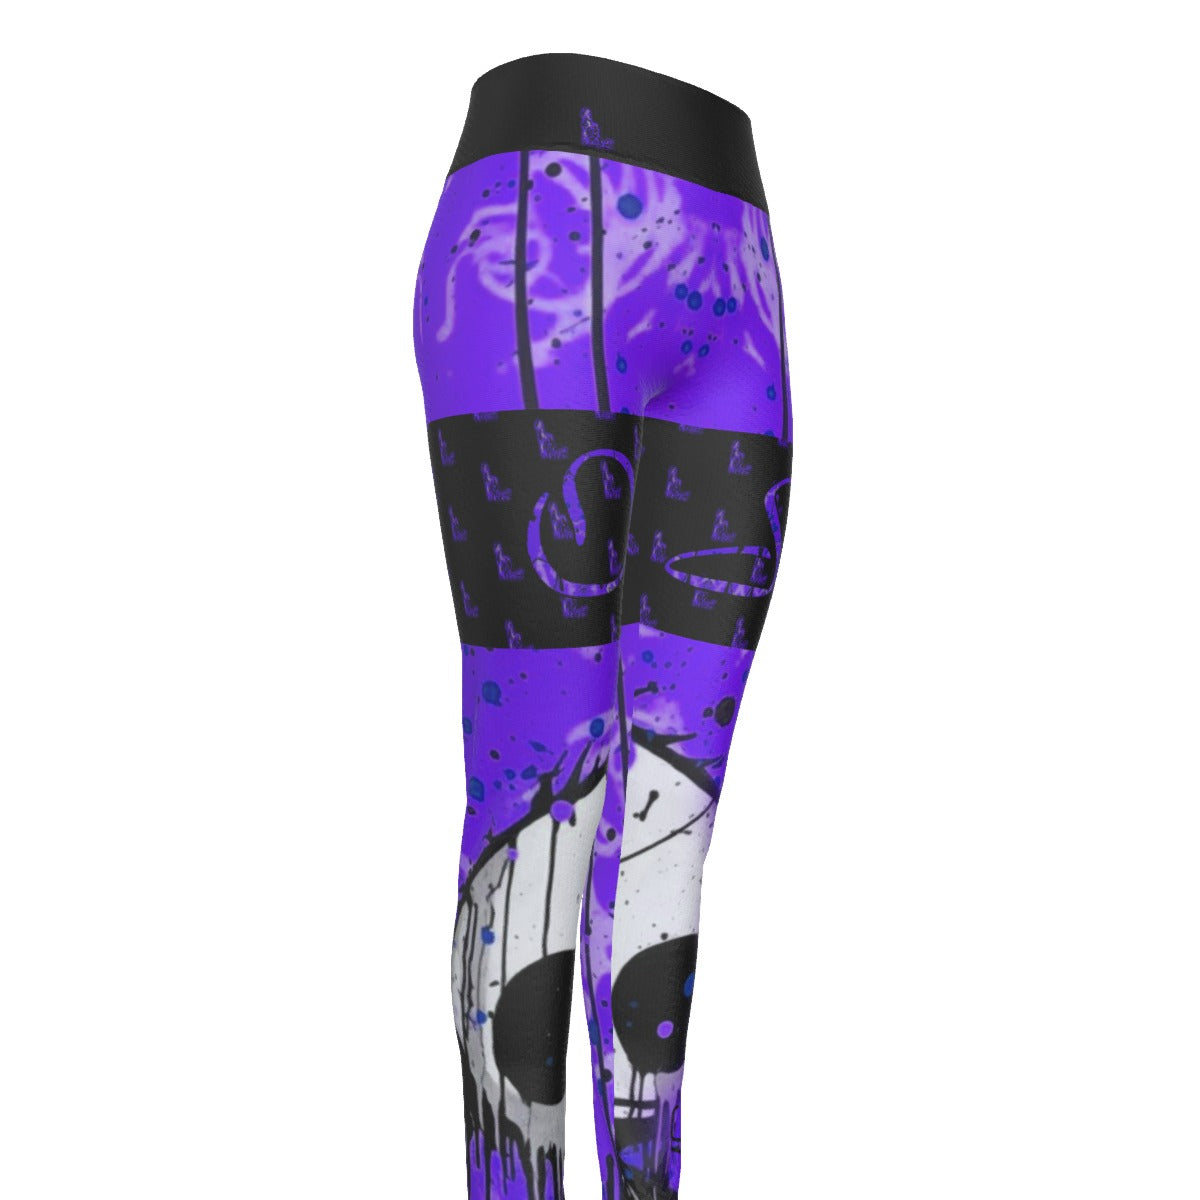 Officially Sexy Creepy Boy Officially Sexy Dark Purple Women's High Waist Thigh High Booty Popper Leggings #2 With OS On Front And Back Thighs (English) 2